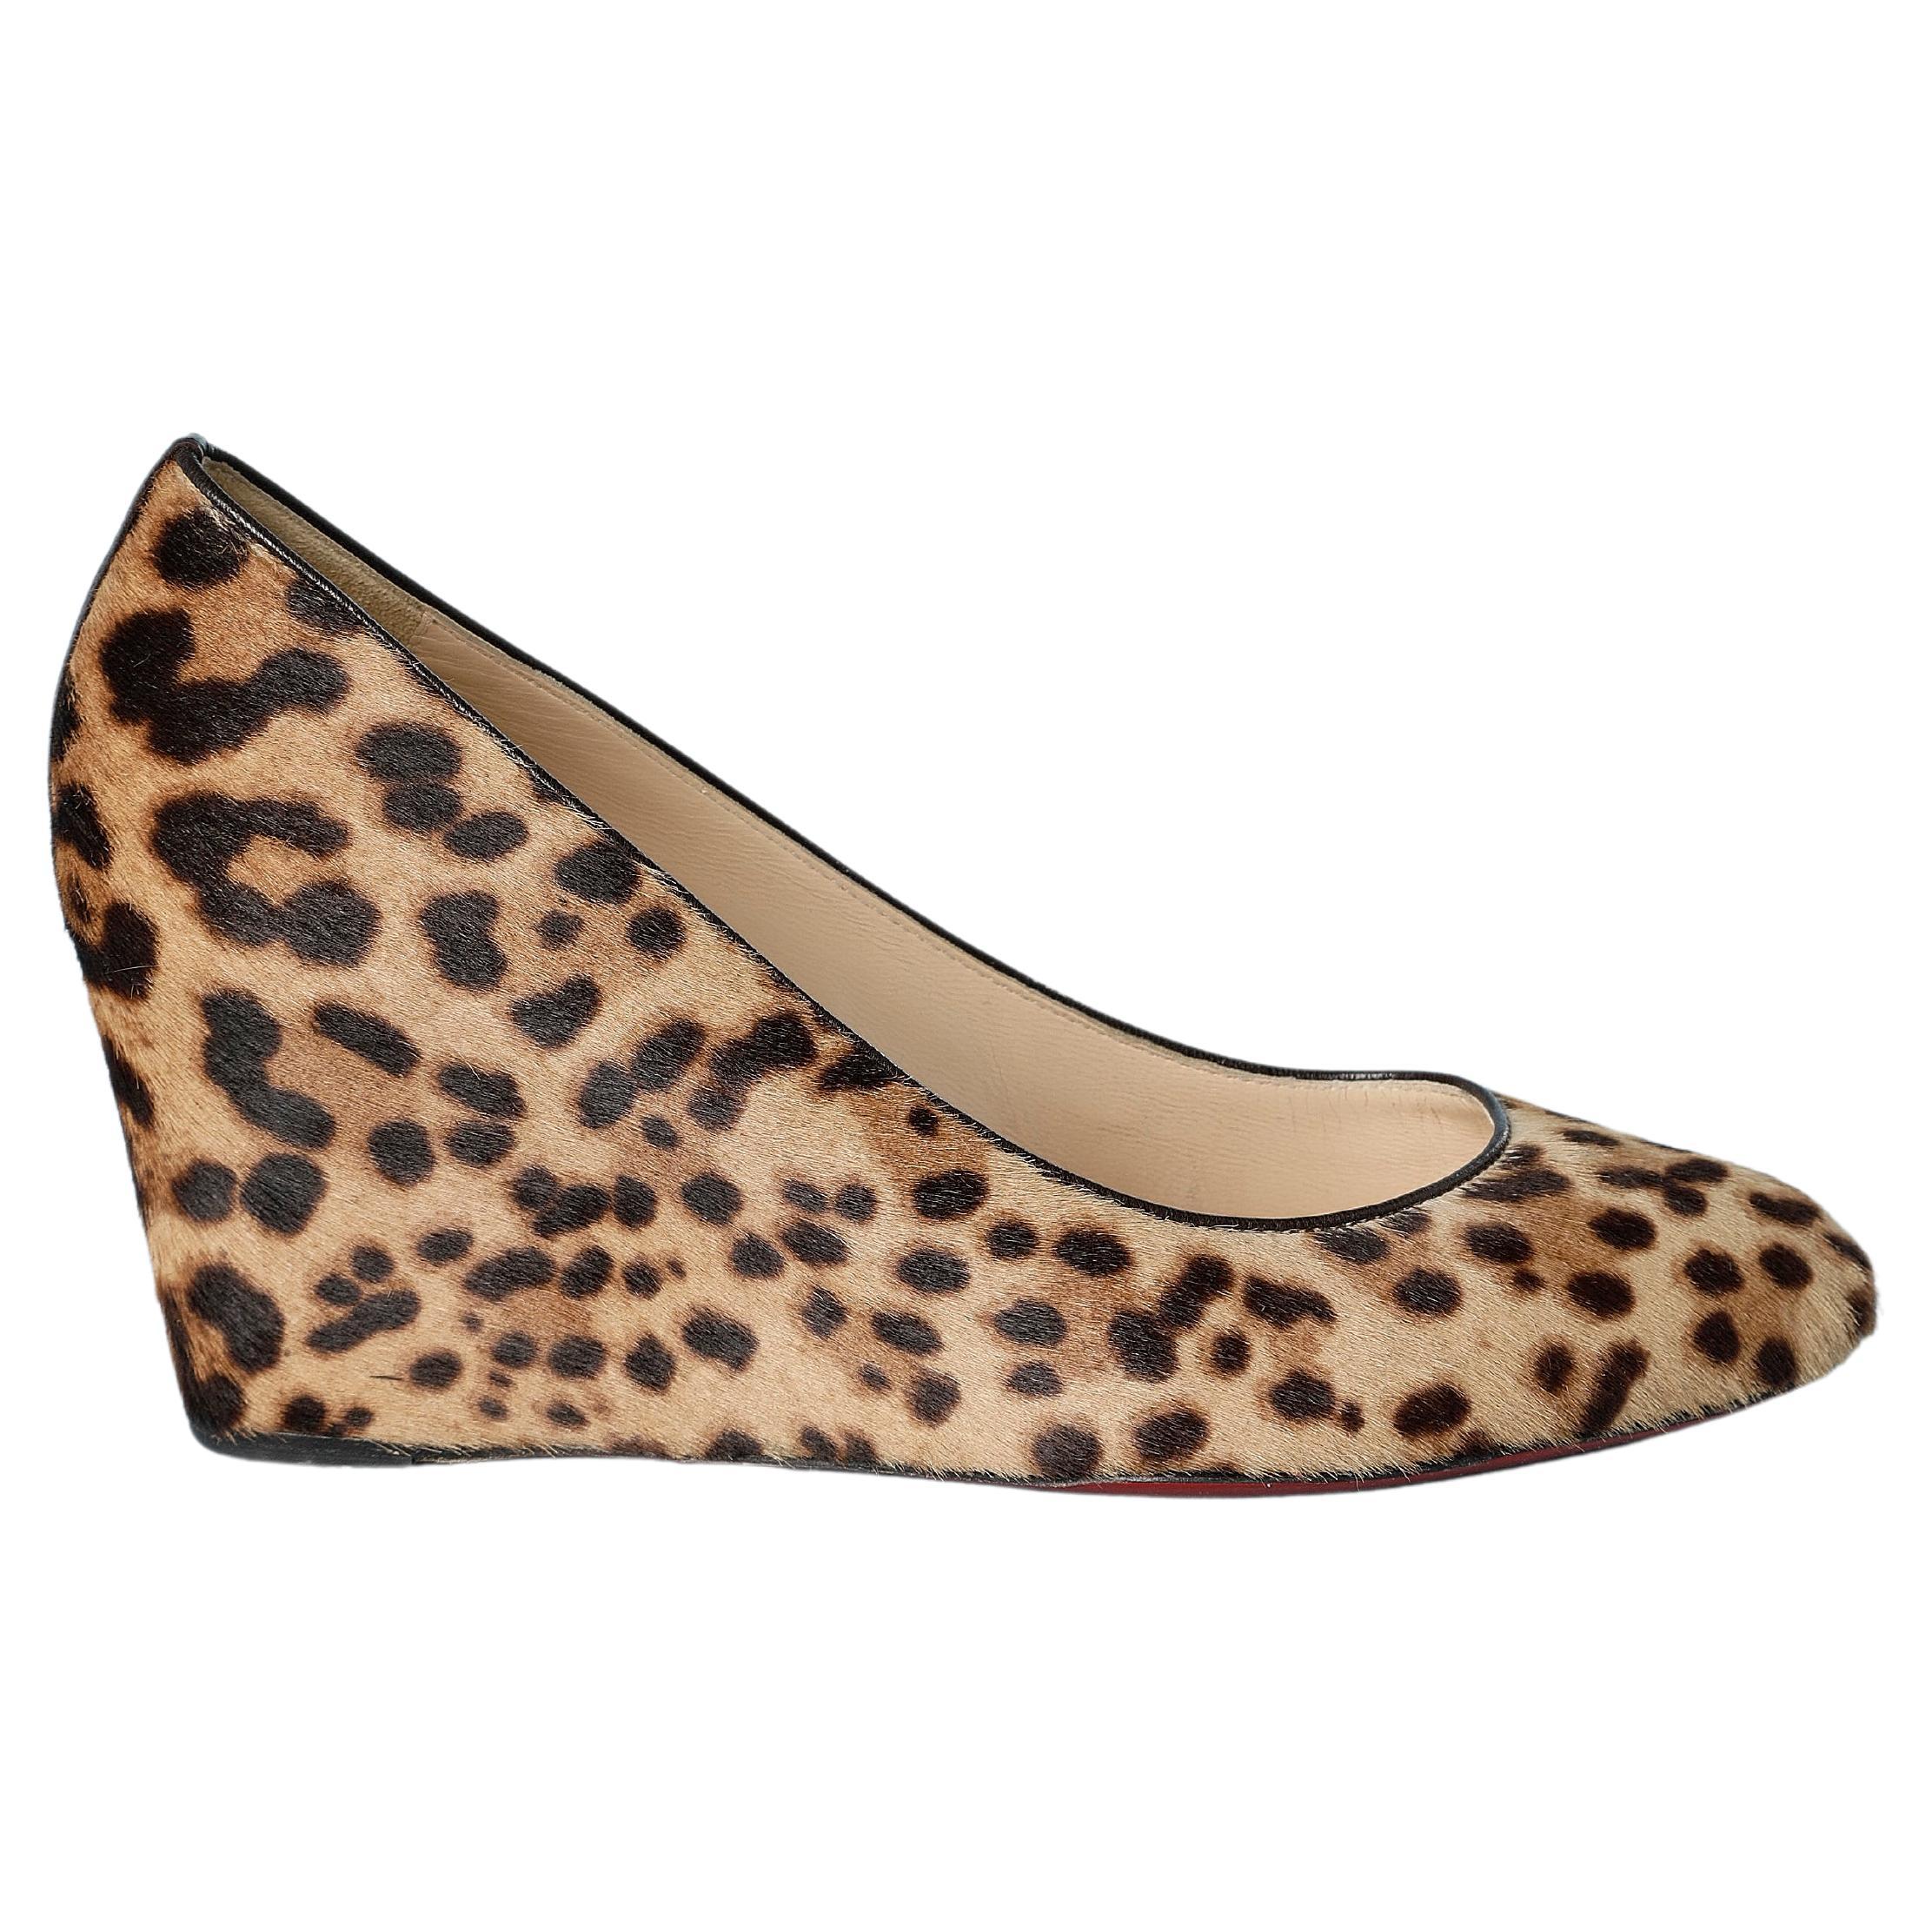 Wedge heel  pump made of goat fur with leopard print on Christian Louboutin  For Sale